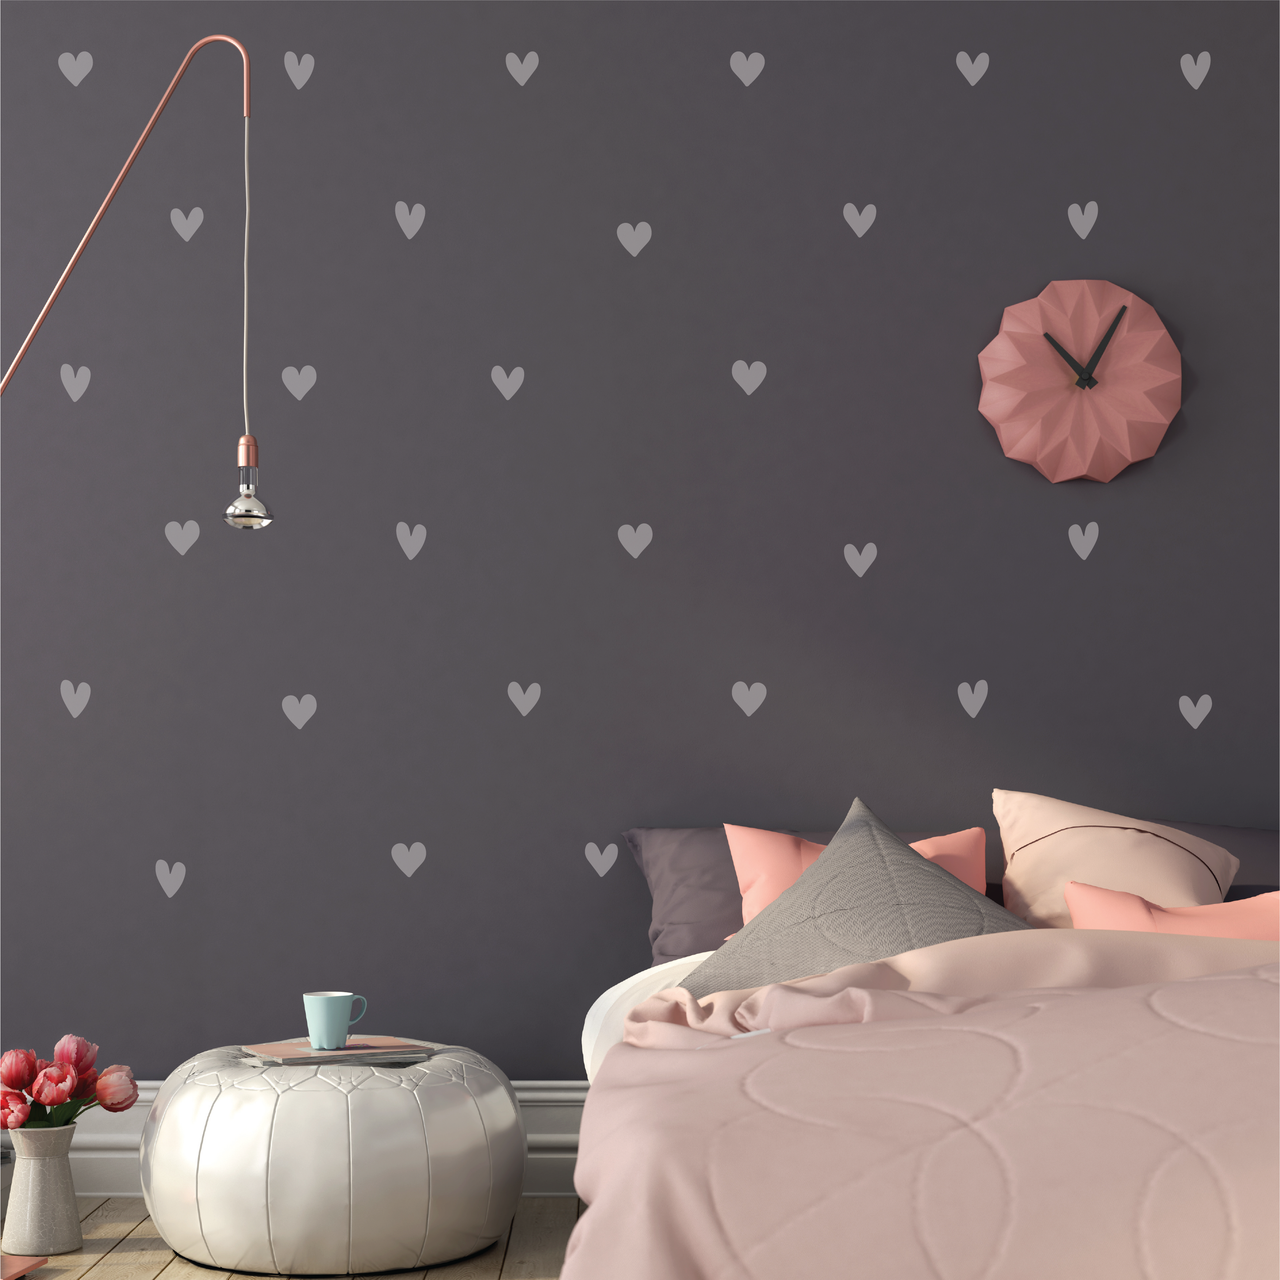 Boho Hearts - Pack of 42 Wall Decals